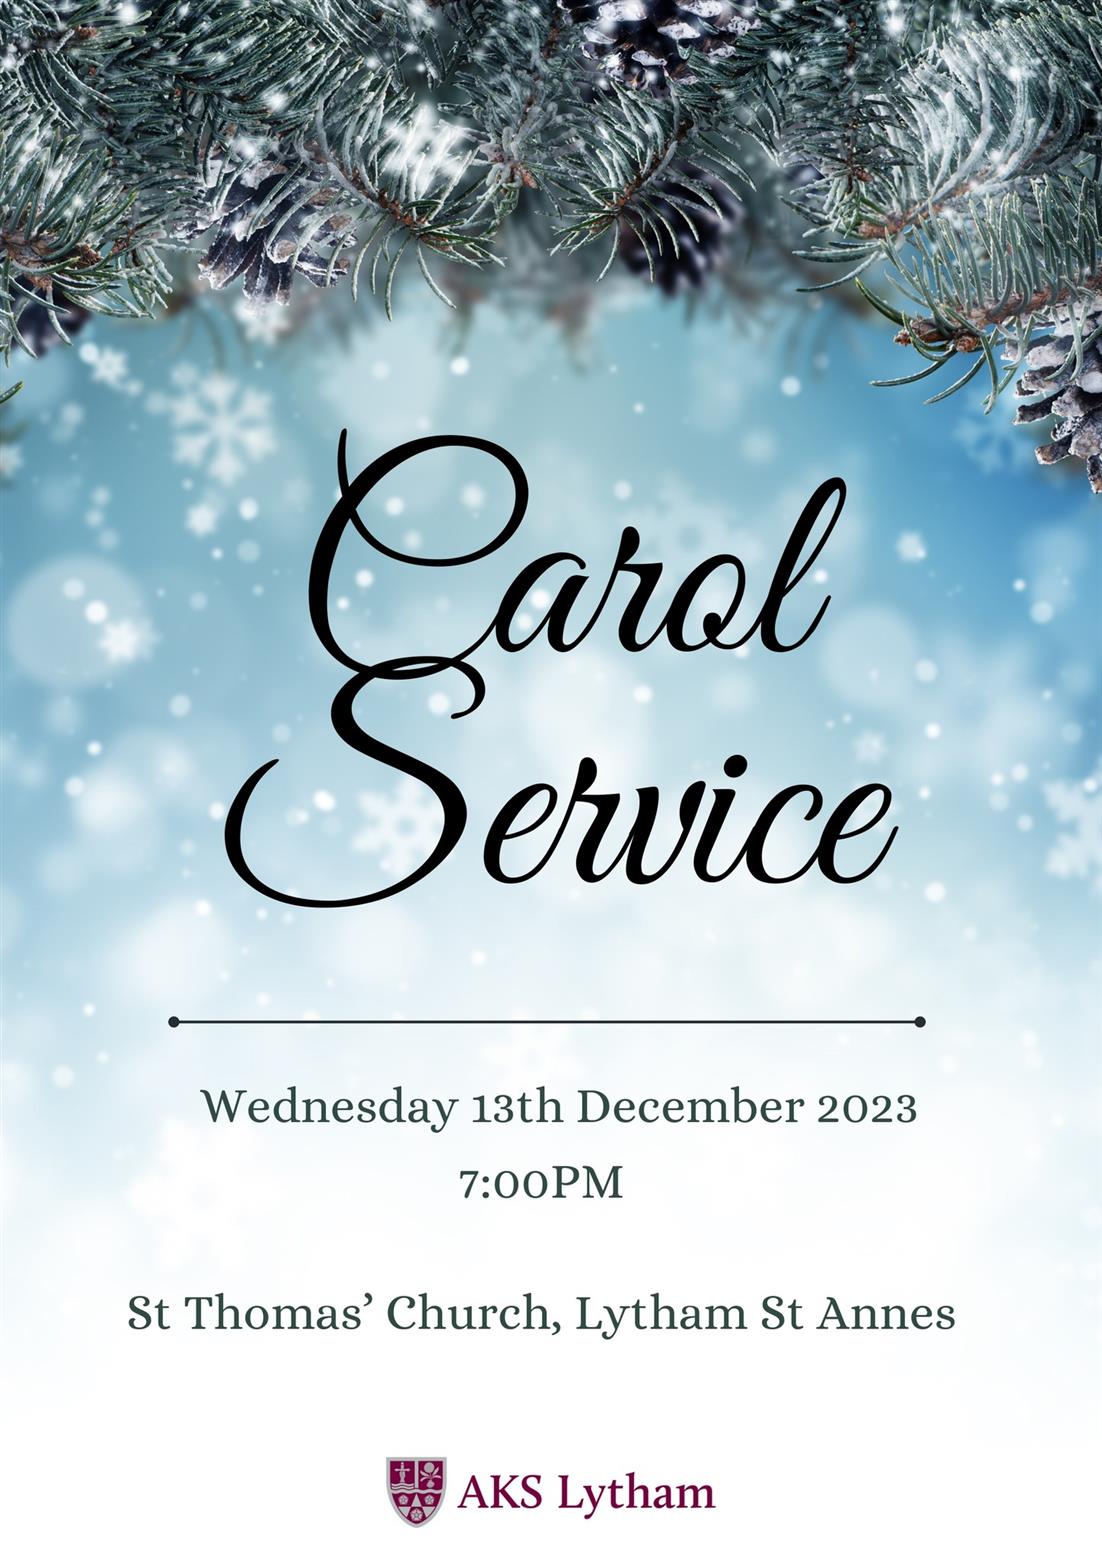 Come and join us for our beautiful Carol Service